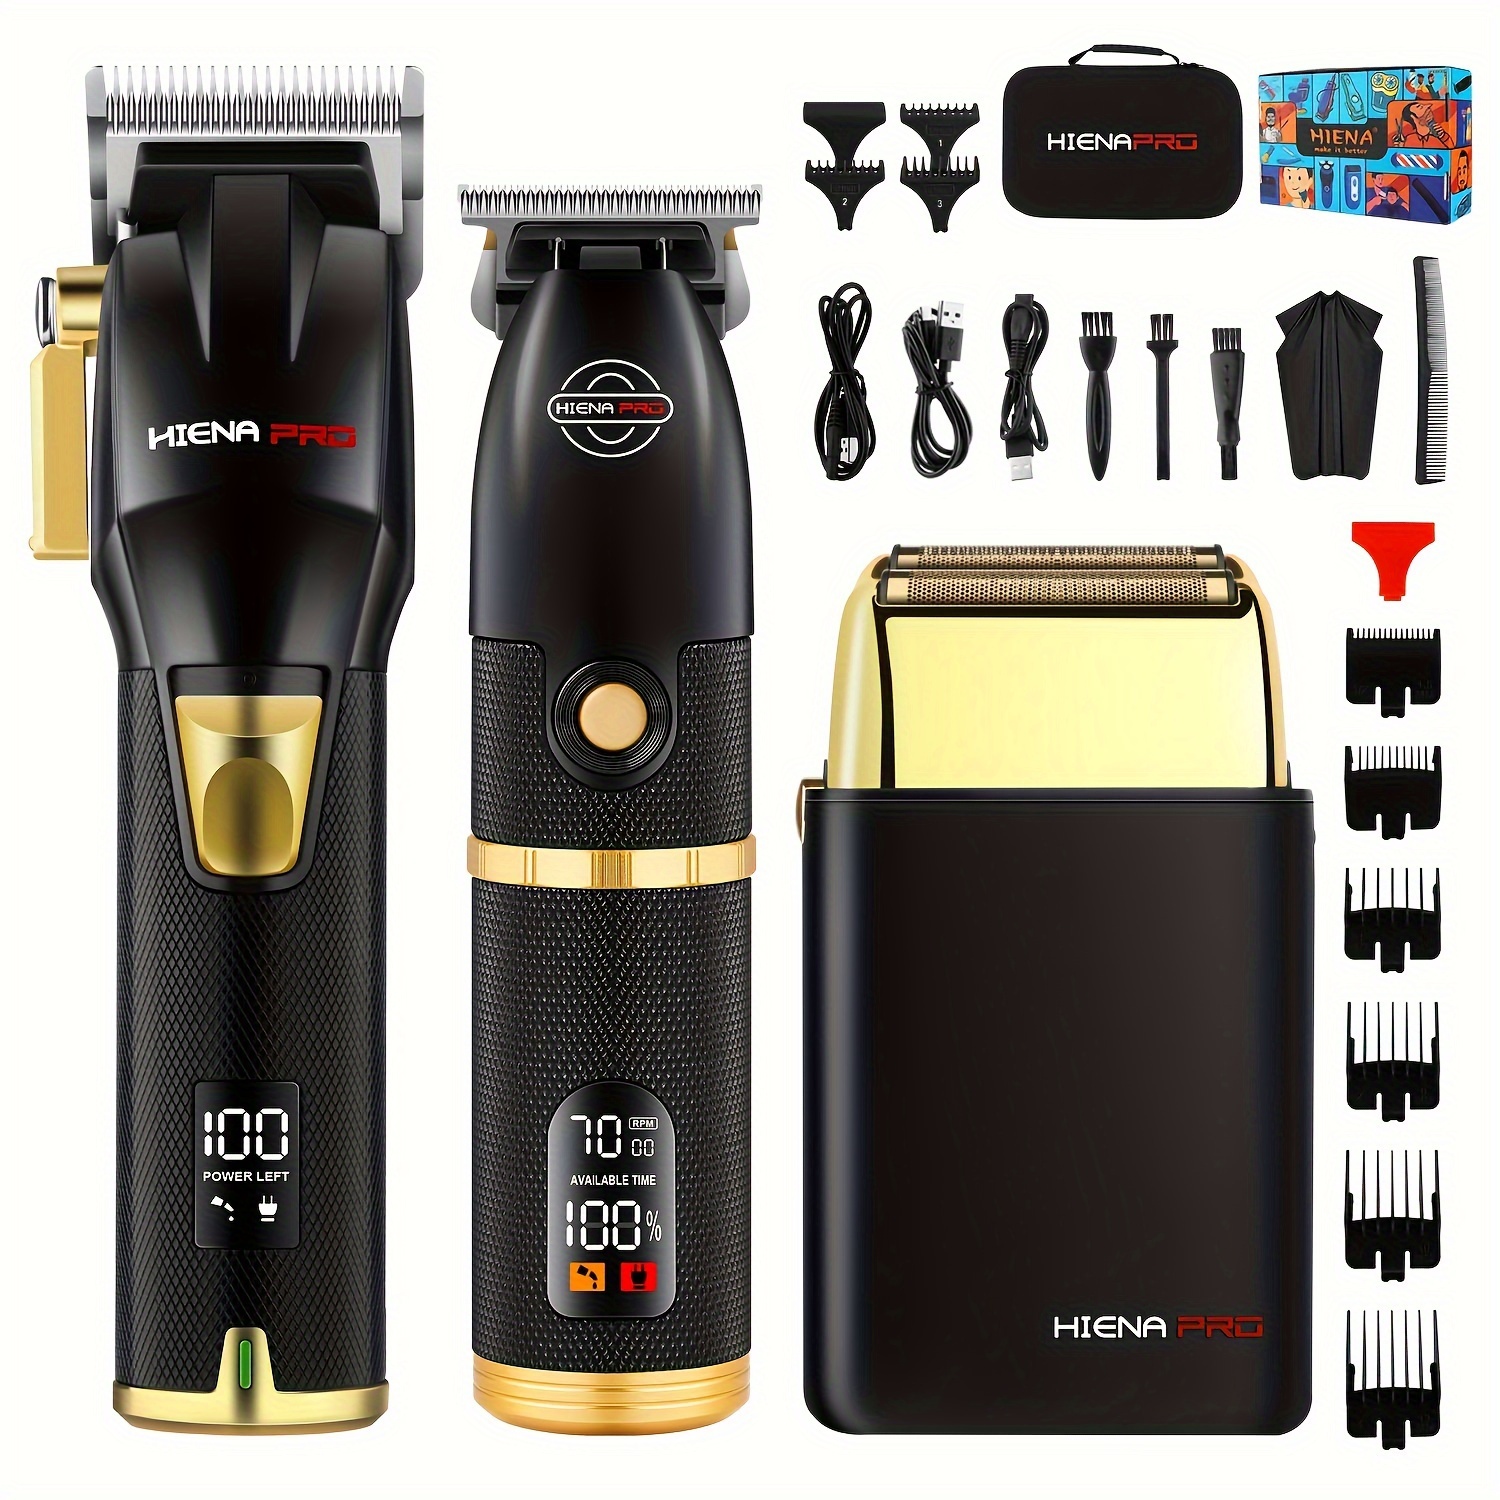 

Professional Hair Clipper Set For Men Usb Rechargeable Hair Trimmer With Lcd Digital Display Electric Clipper Good For Men's Festival Gift Birthday Gift